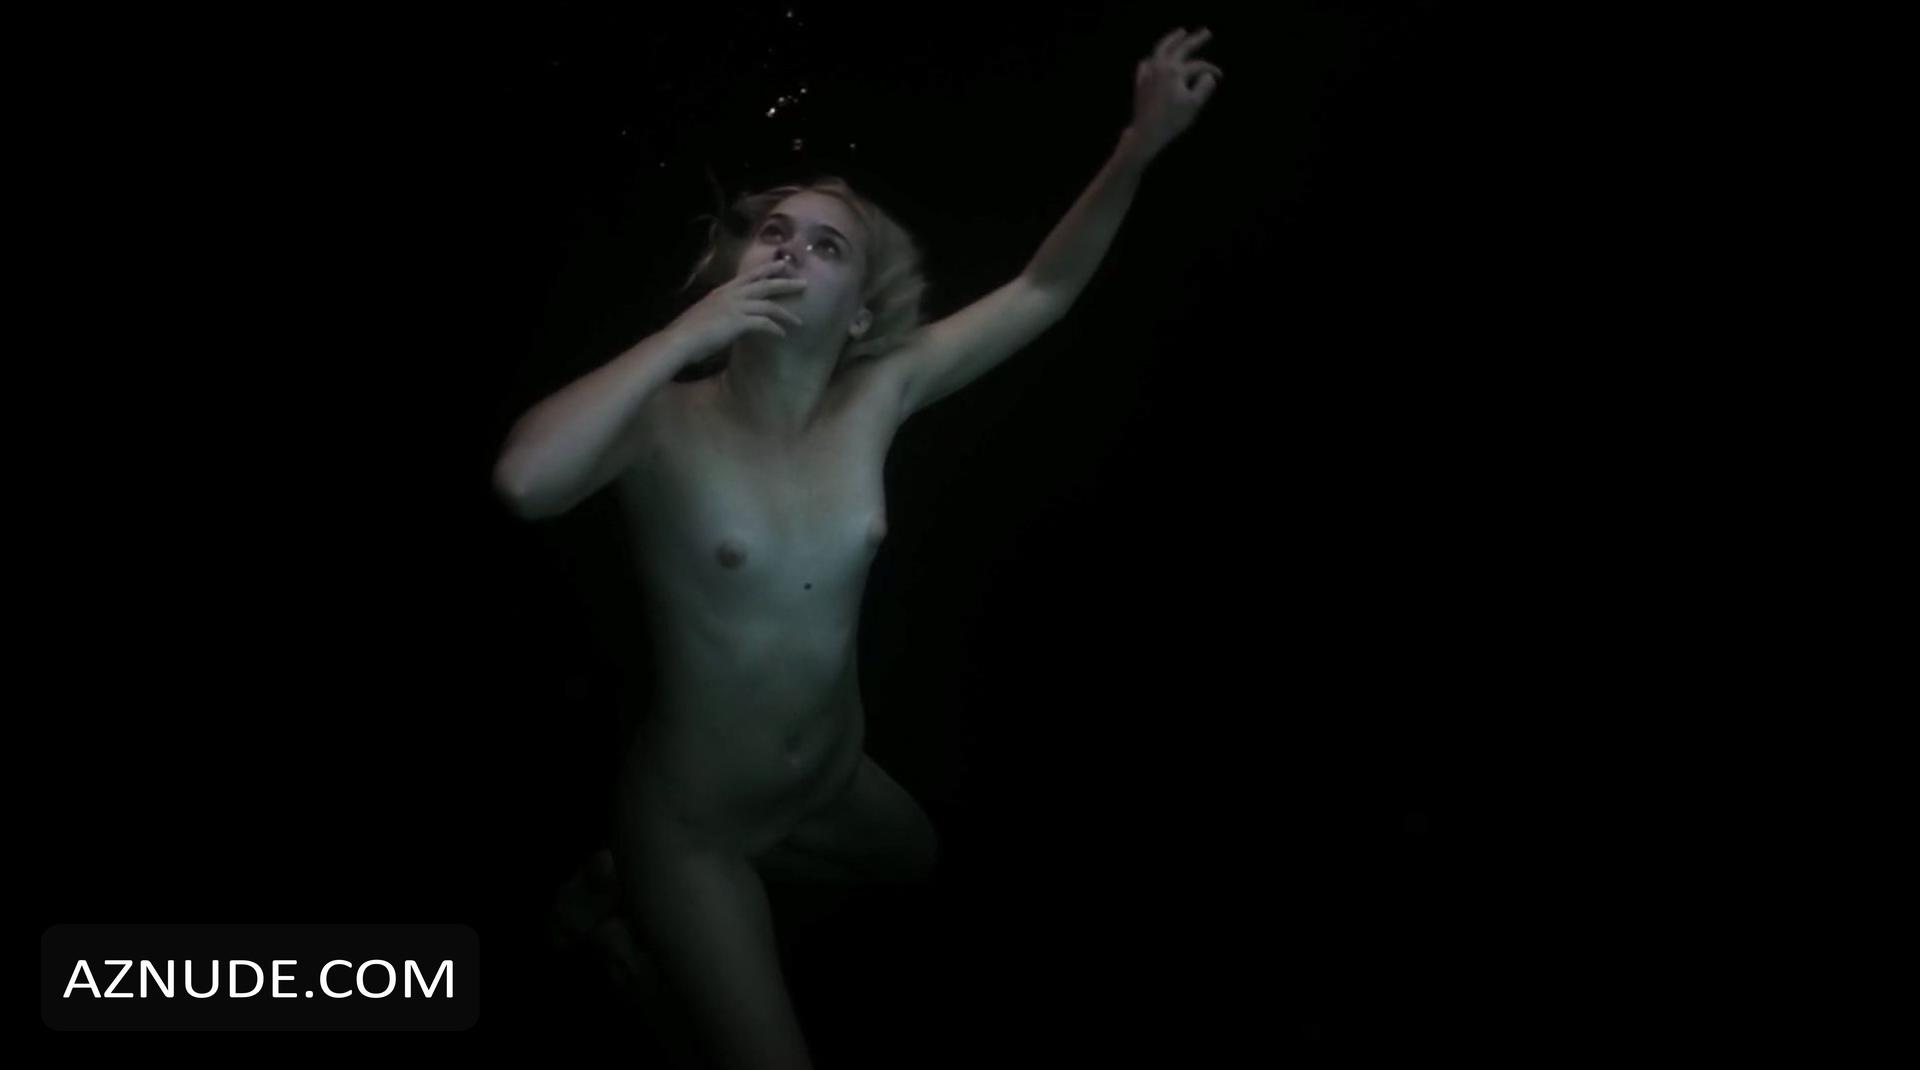 Naked woman drowning underwater